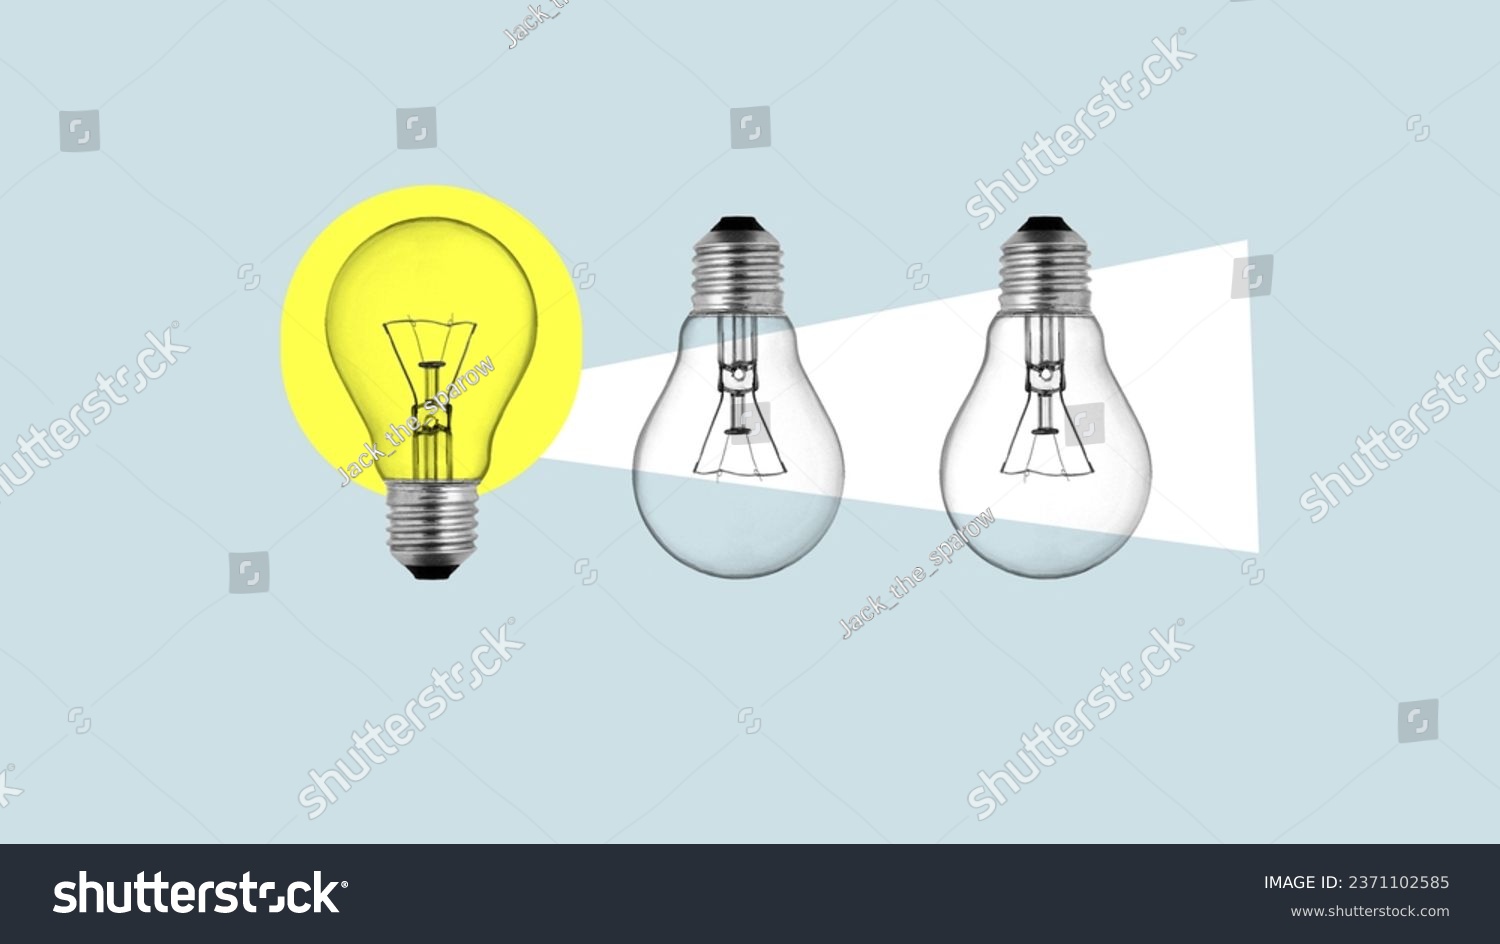 Share knowledge is shown using a collage of the photo of light bulbs. Motivational Skills and leadership #2371102585